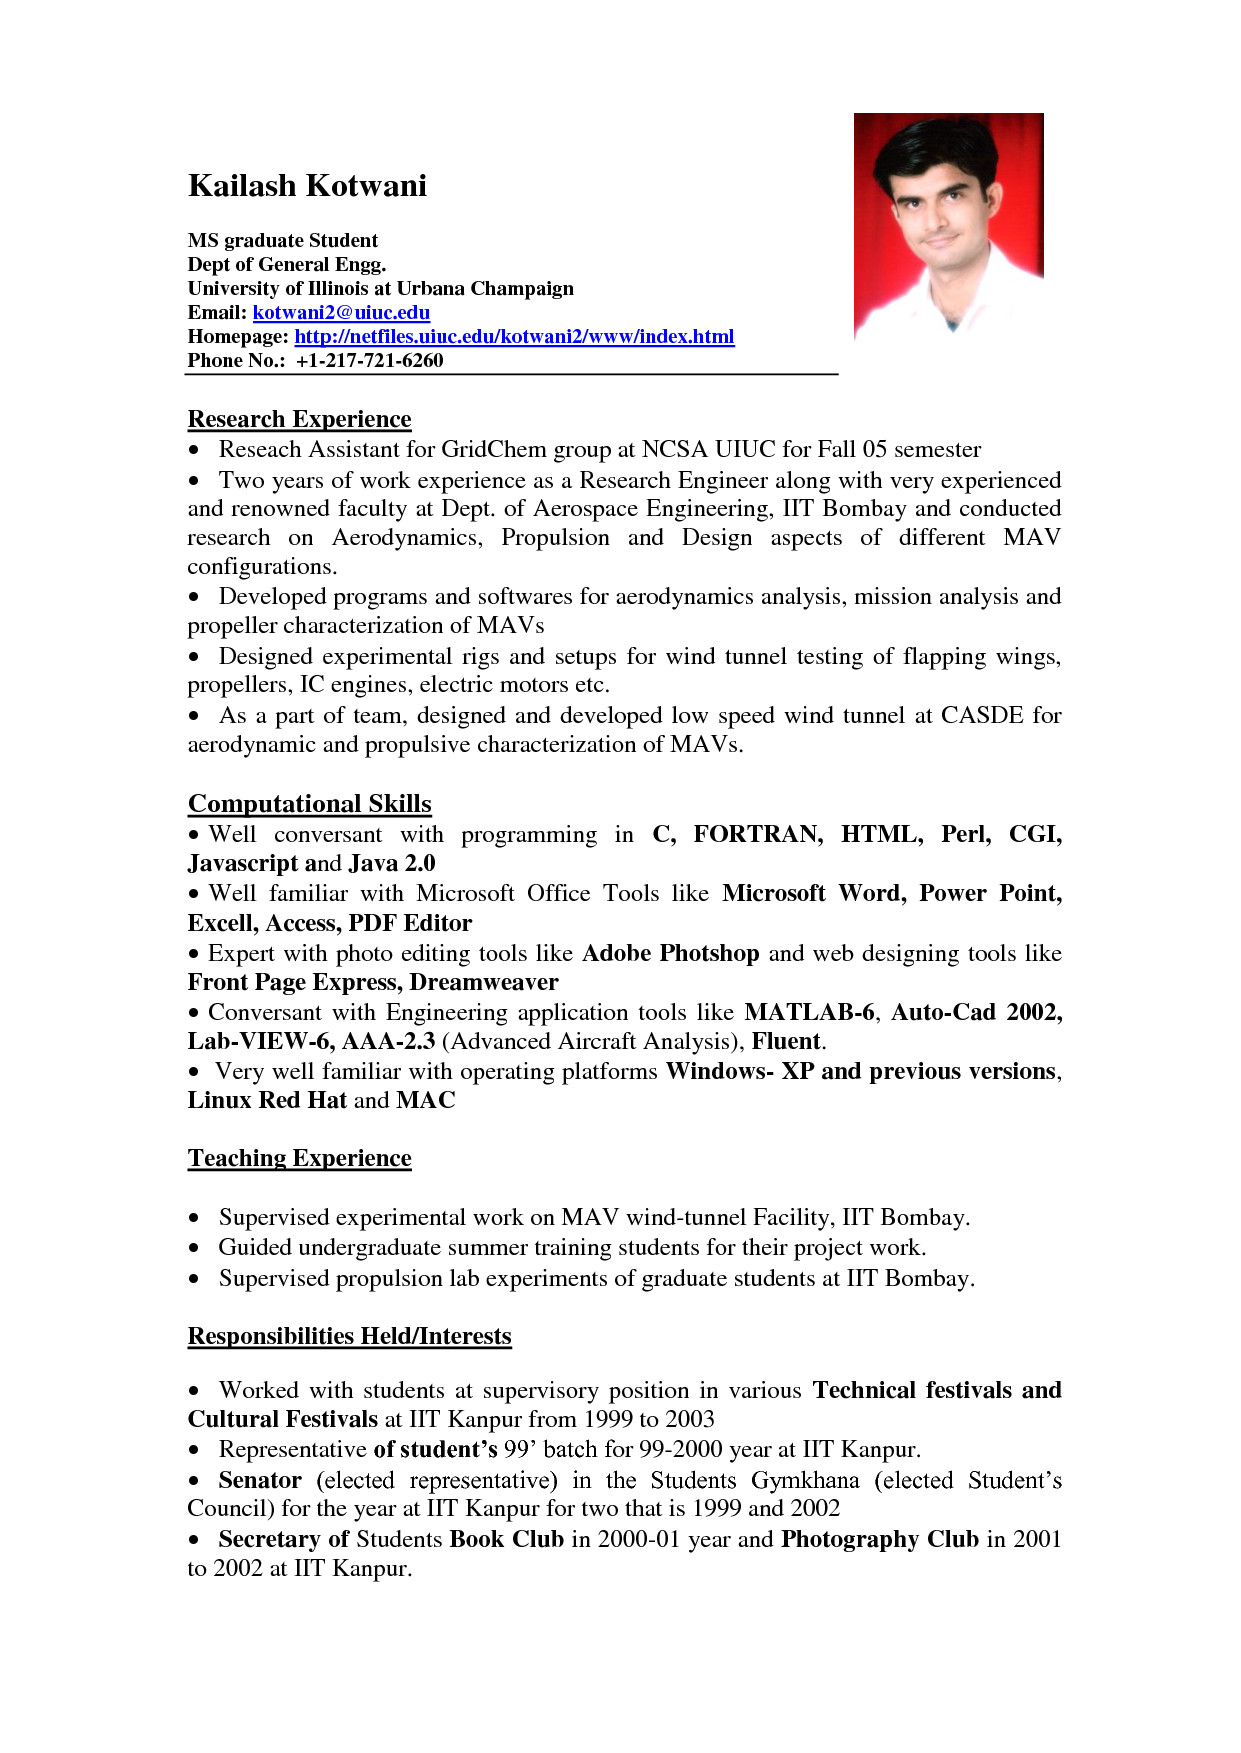 Best Sample Resume format for Experienced 11 Student Resume Samples No Experience